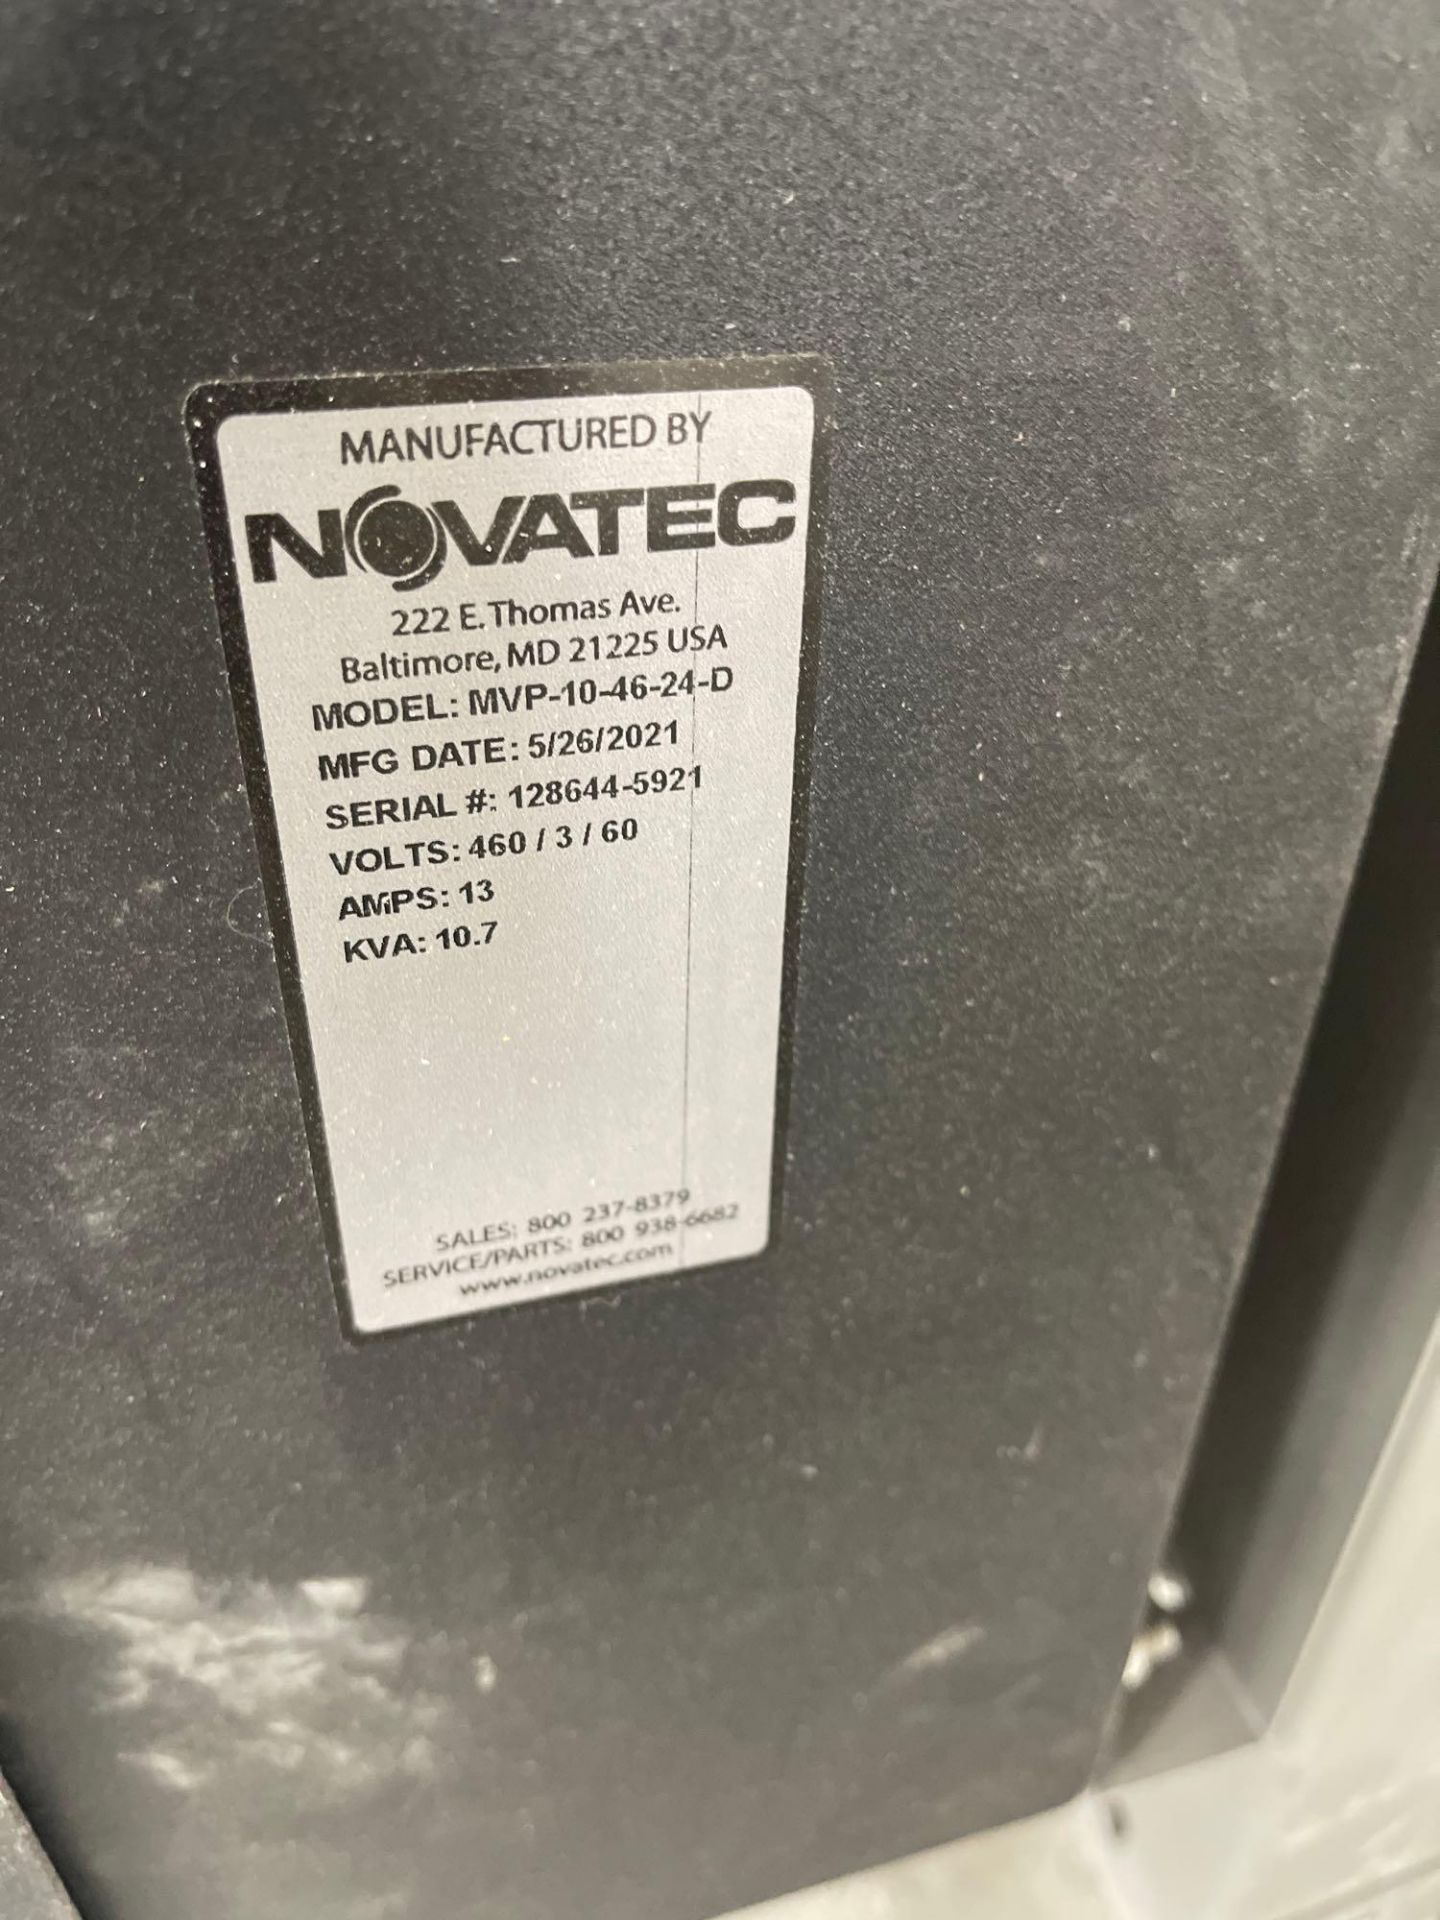 (2021) Novatec Blower with Dust Collector - Image 6 of 8